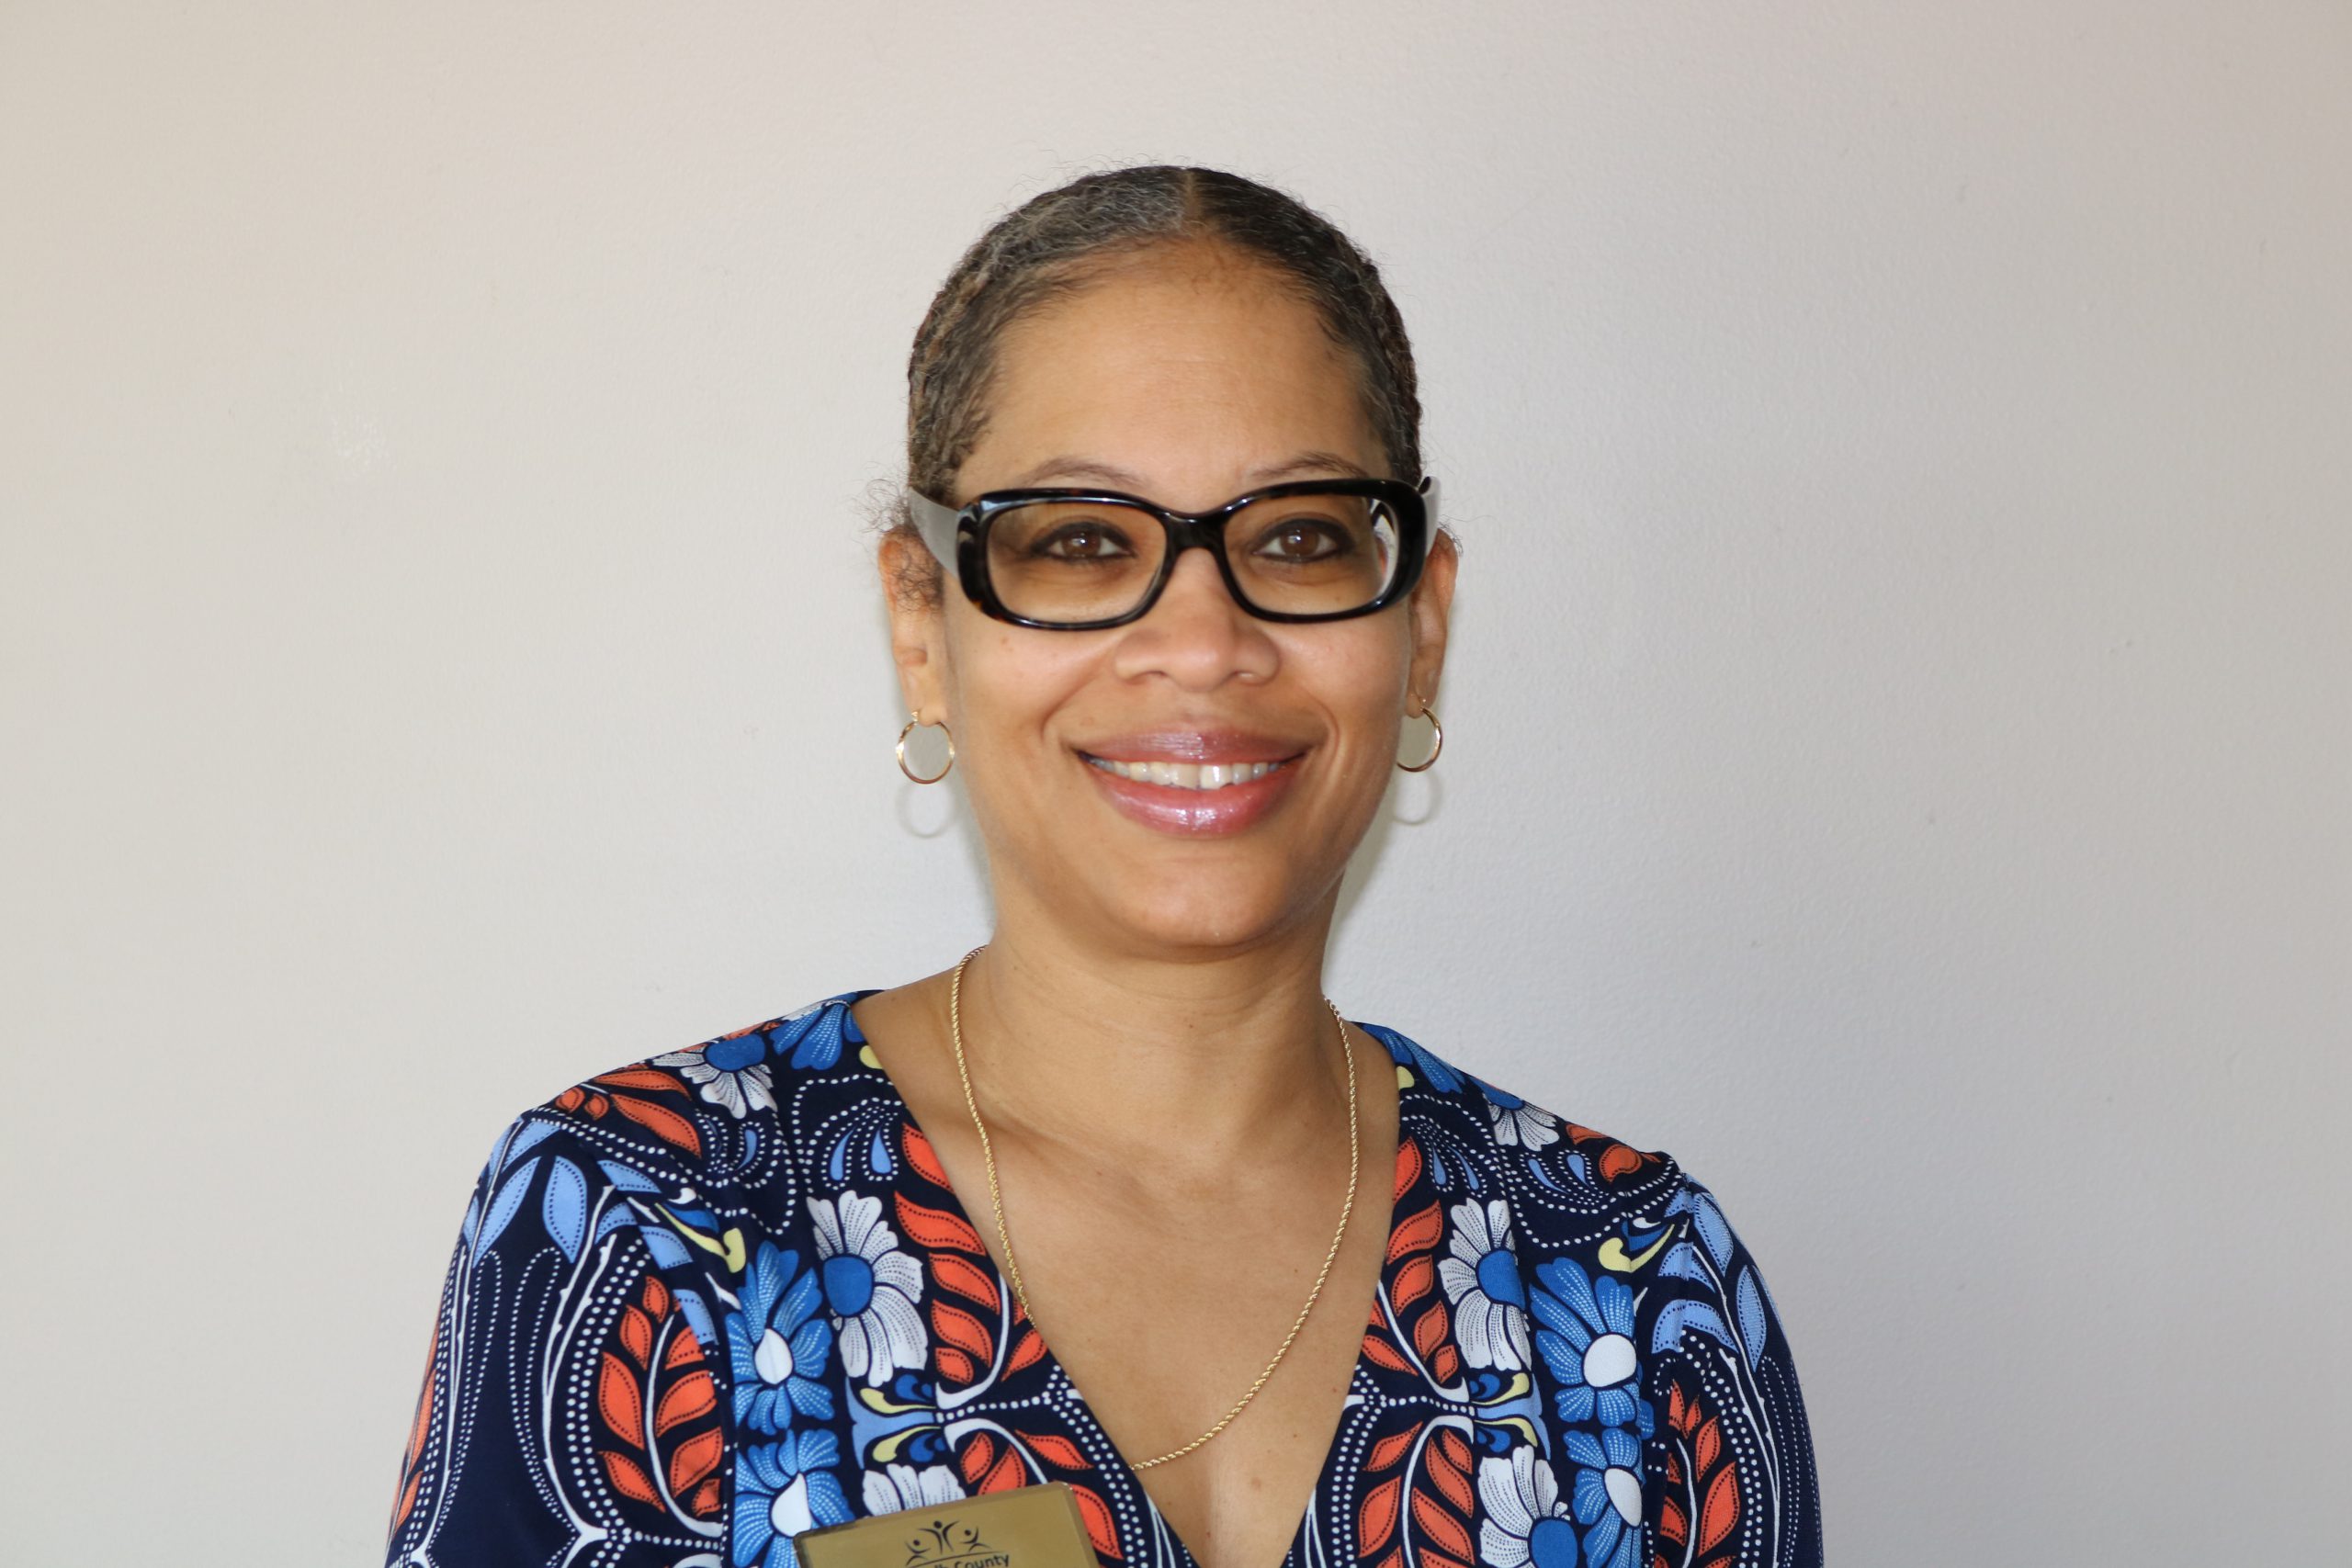 Dr. Kimberly Anderson